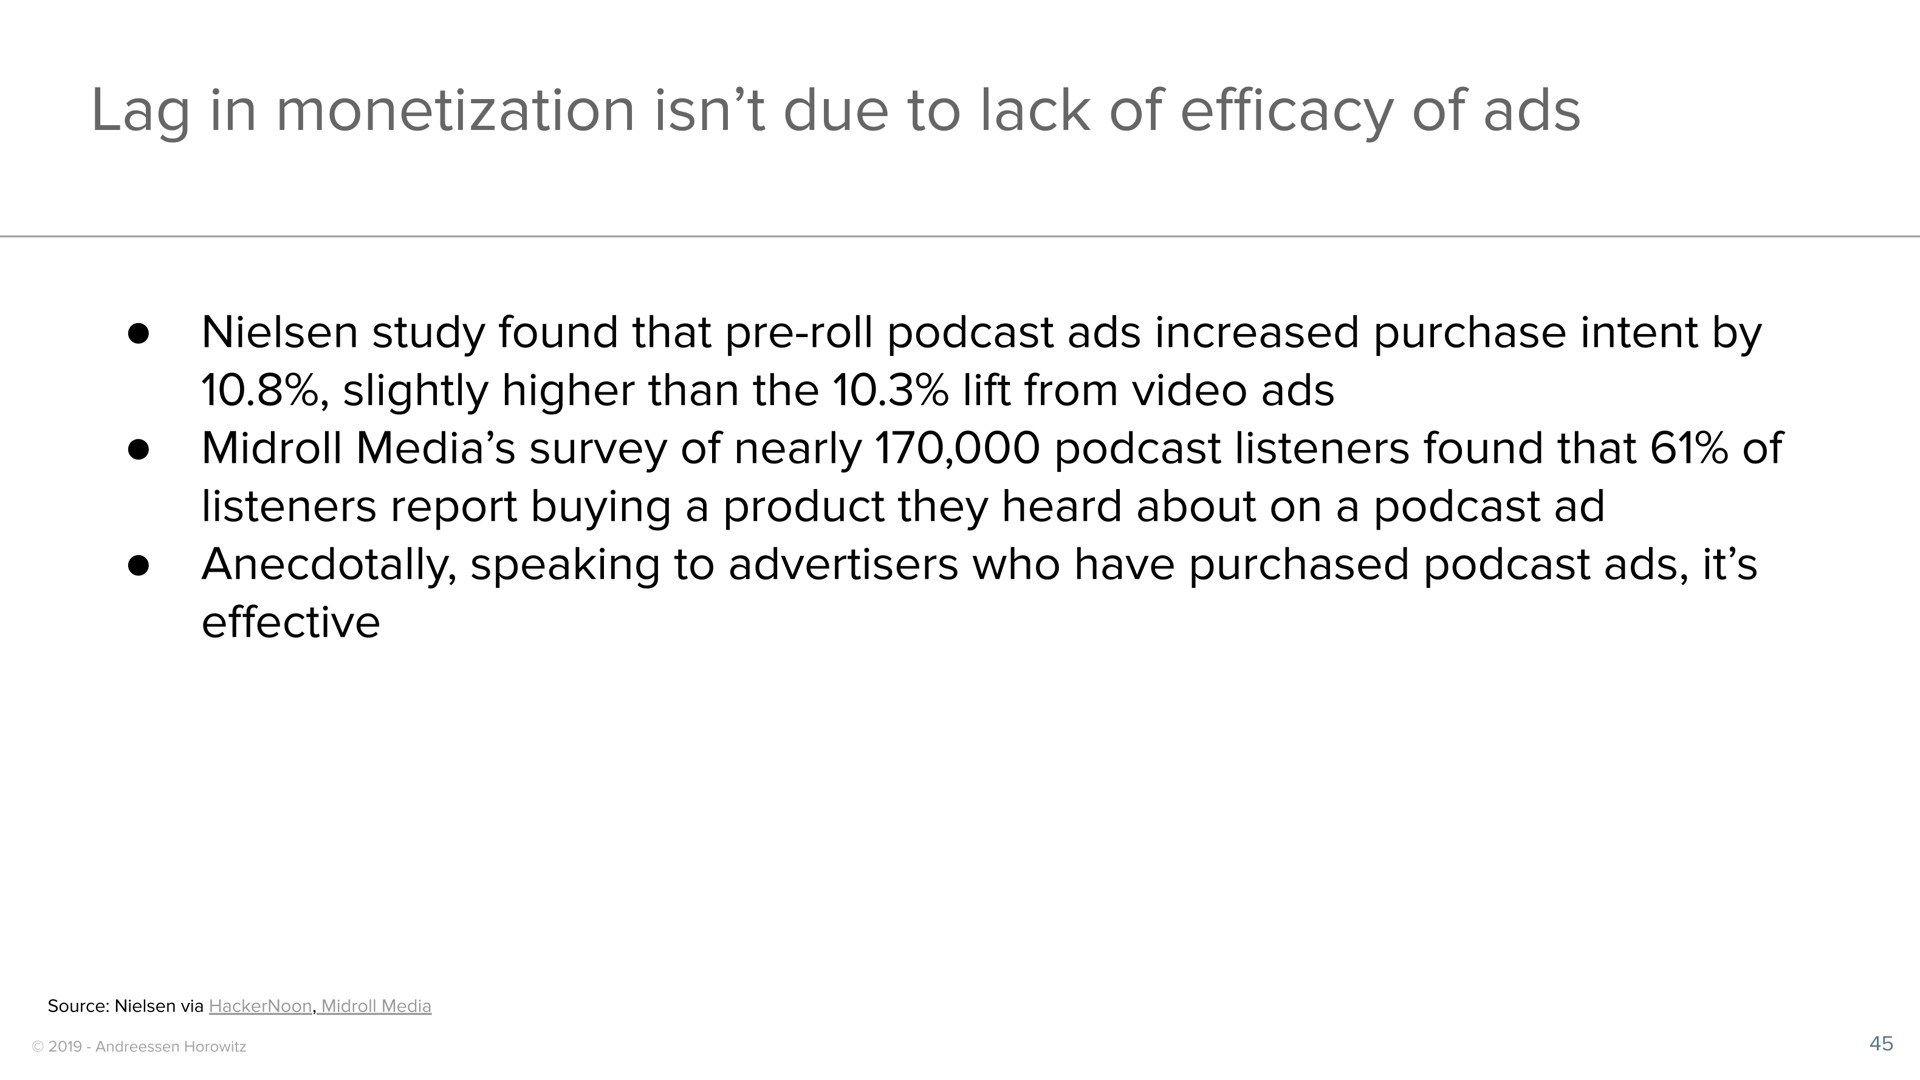 lag in monetization due to lack of efficacy of ads | a16z